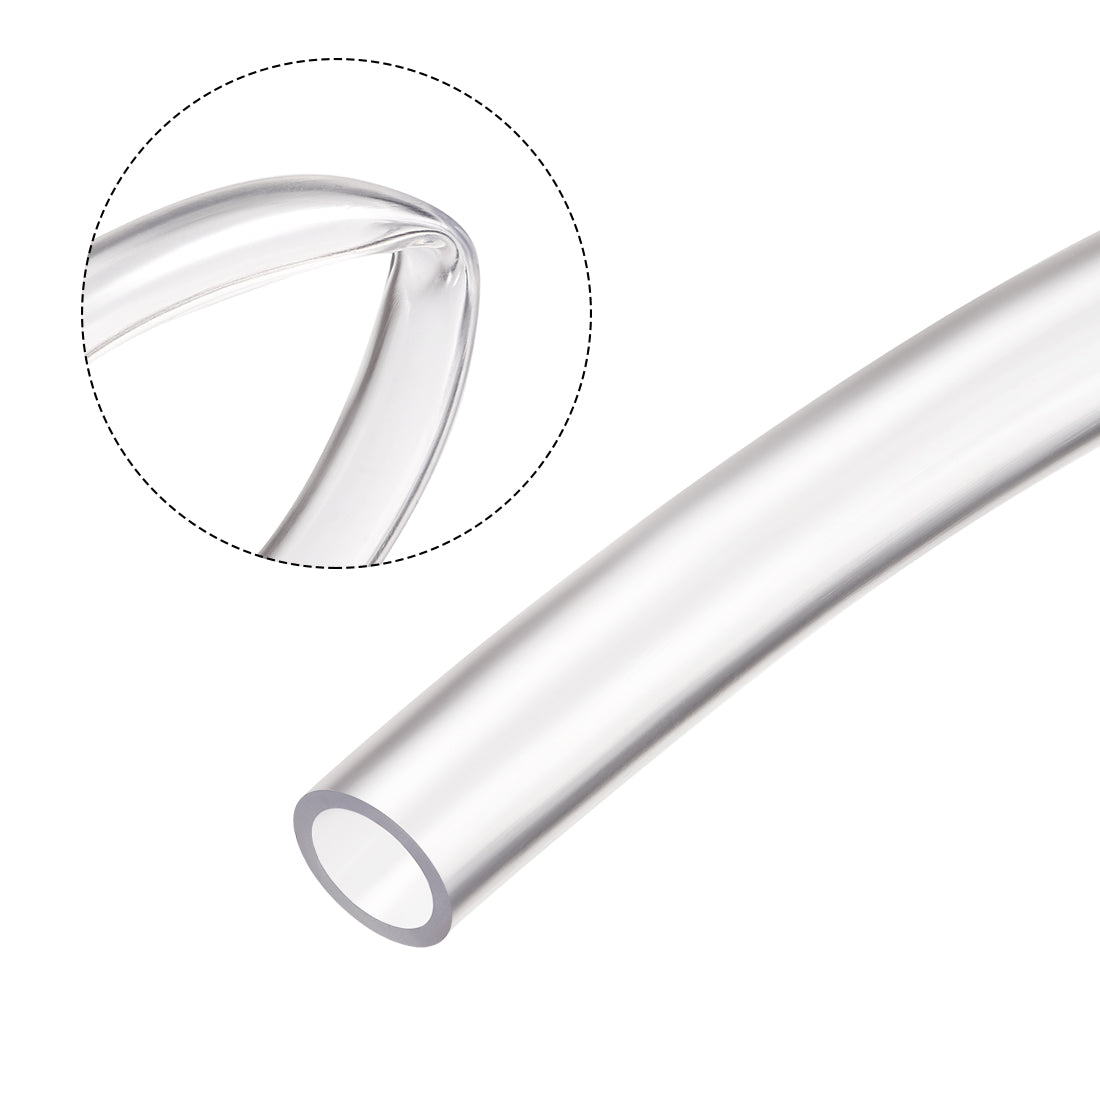 uxcell Uxcell PVC Vinyl Tubing Plastic Flexible Water Pipe